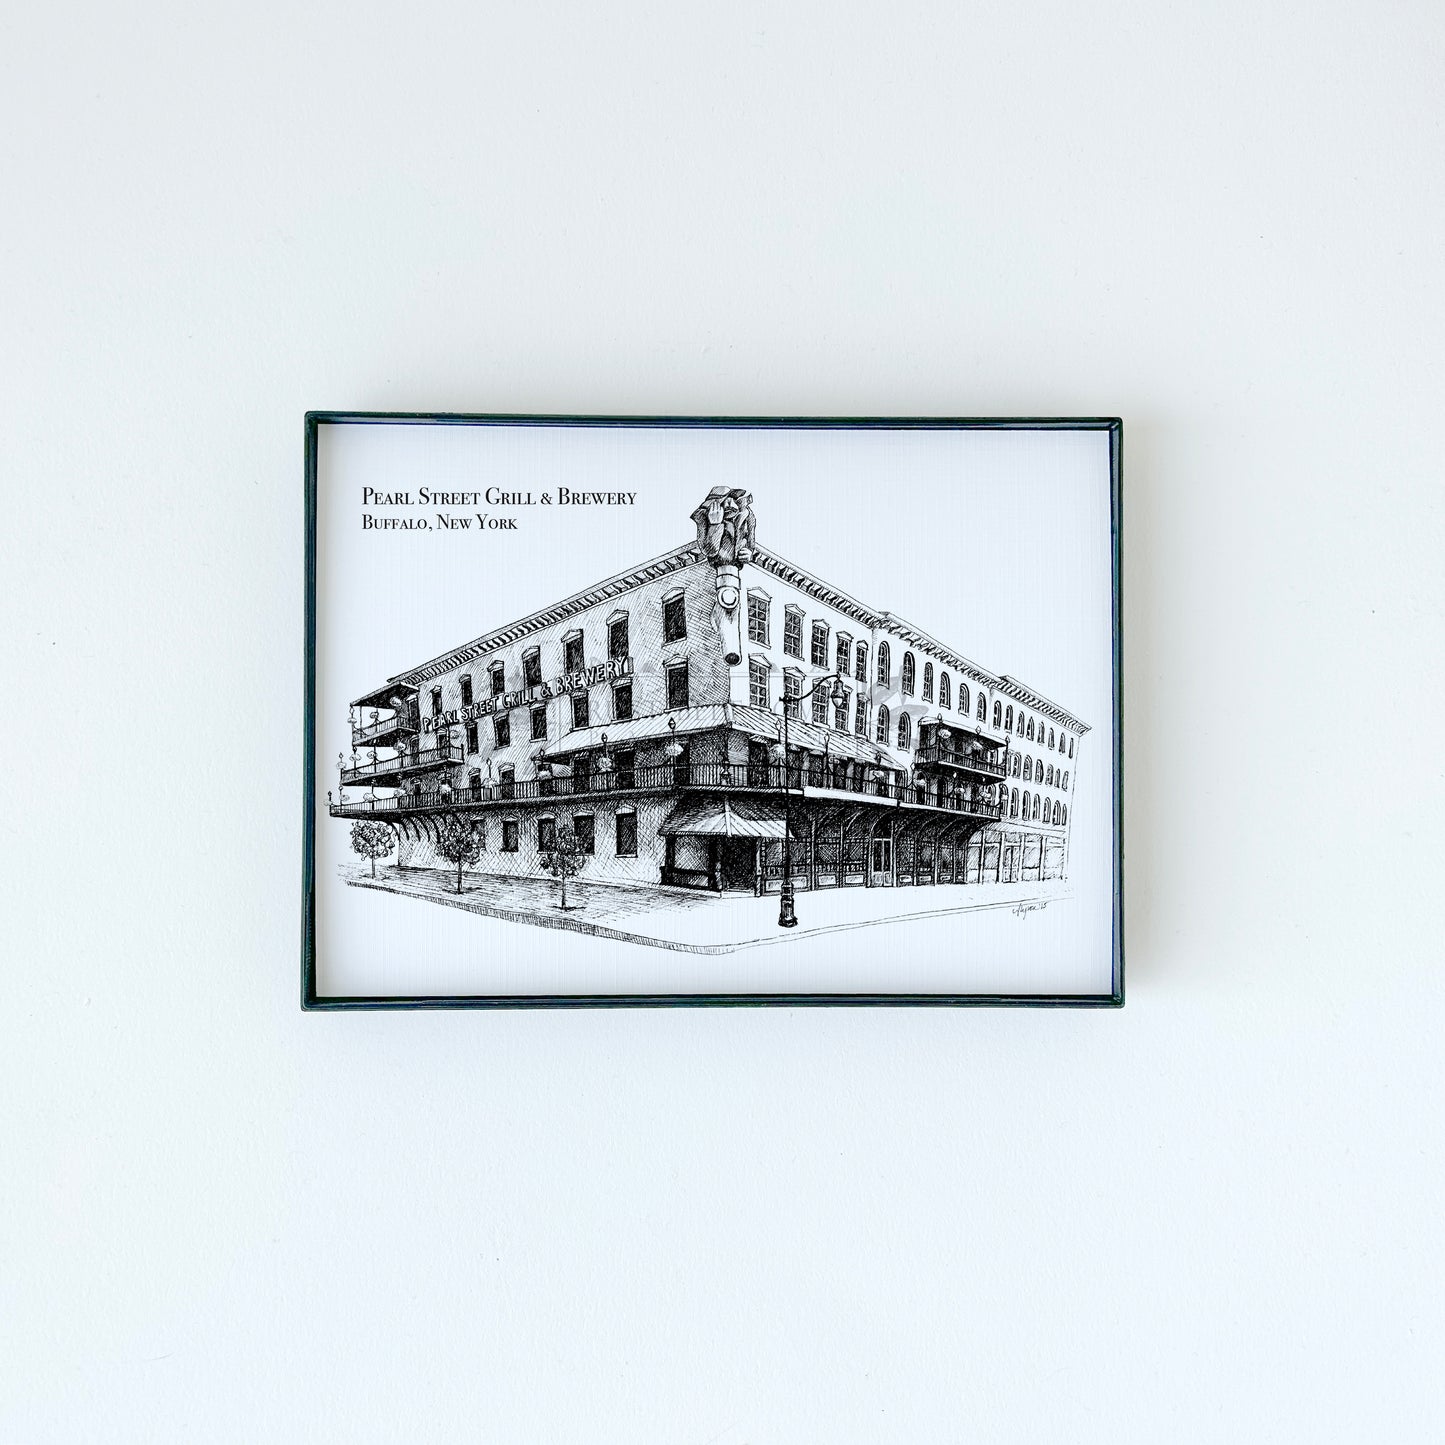 Pearl Street Grill & Brewery illustration in black ink on white paper by Rust Belt Love